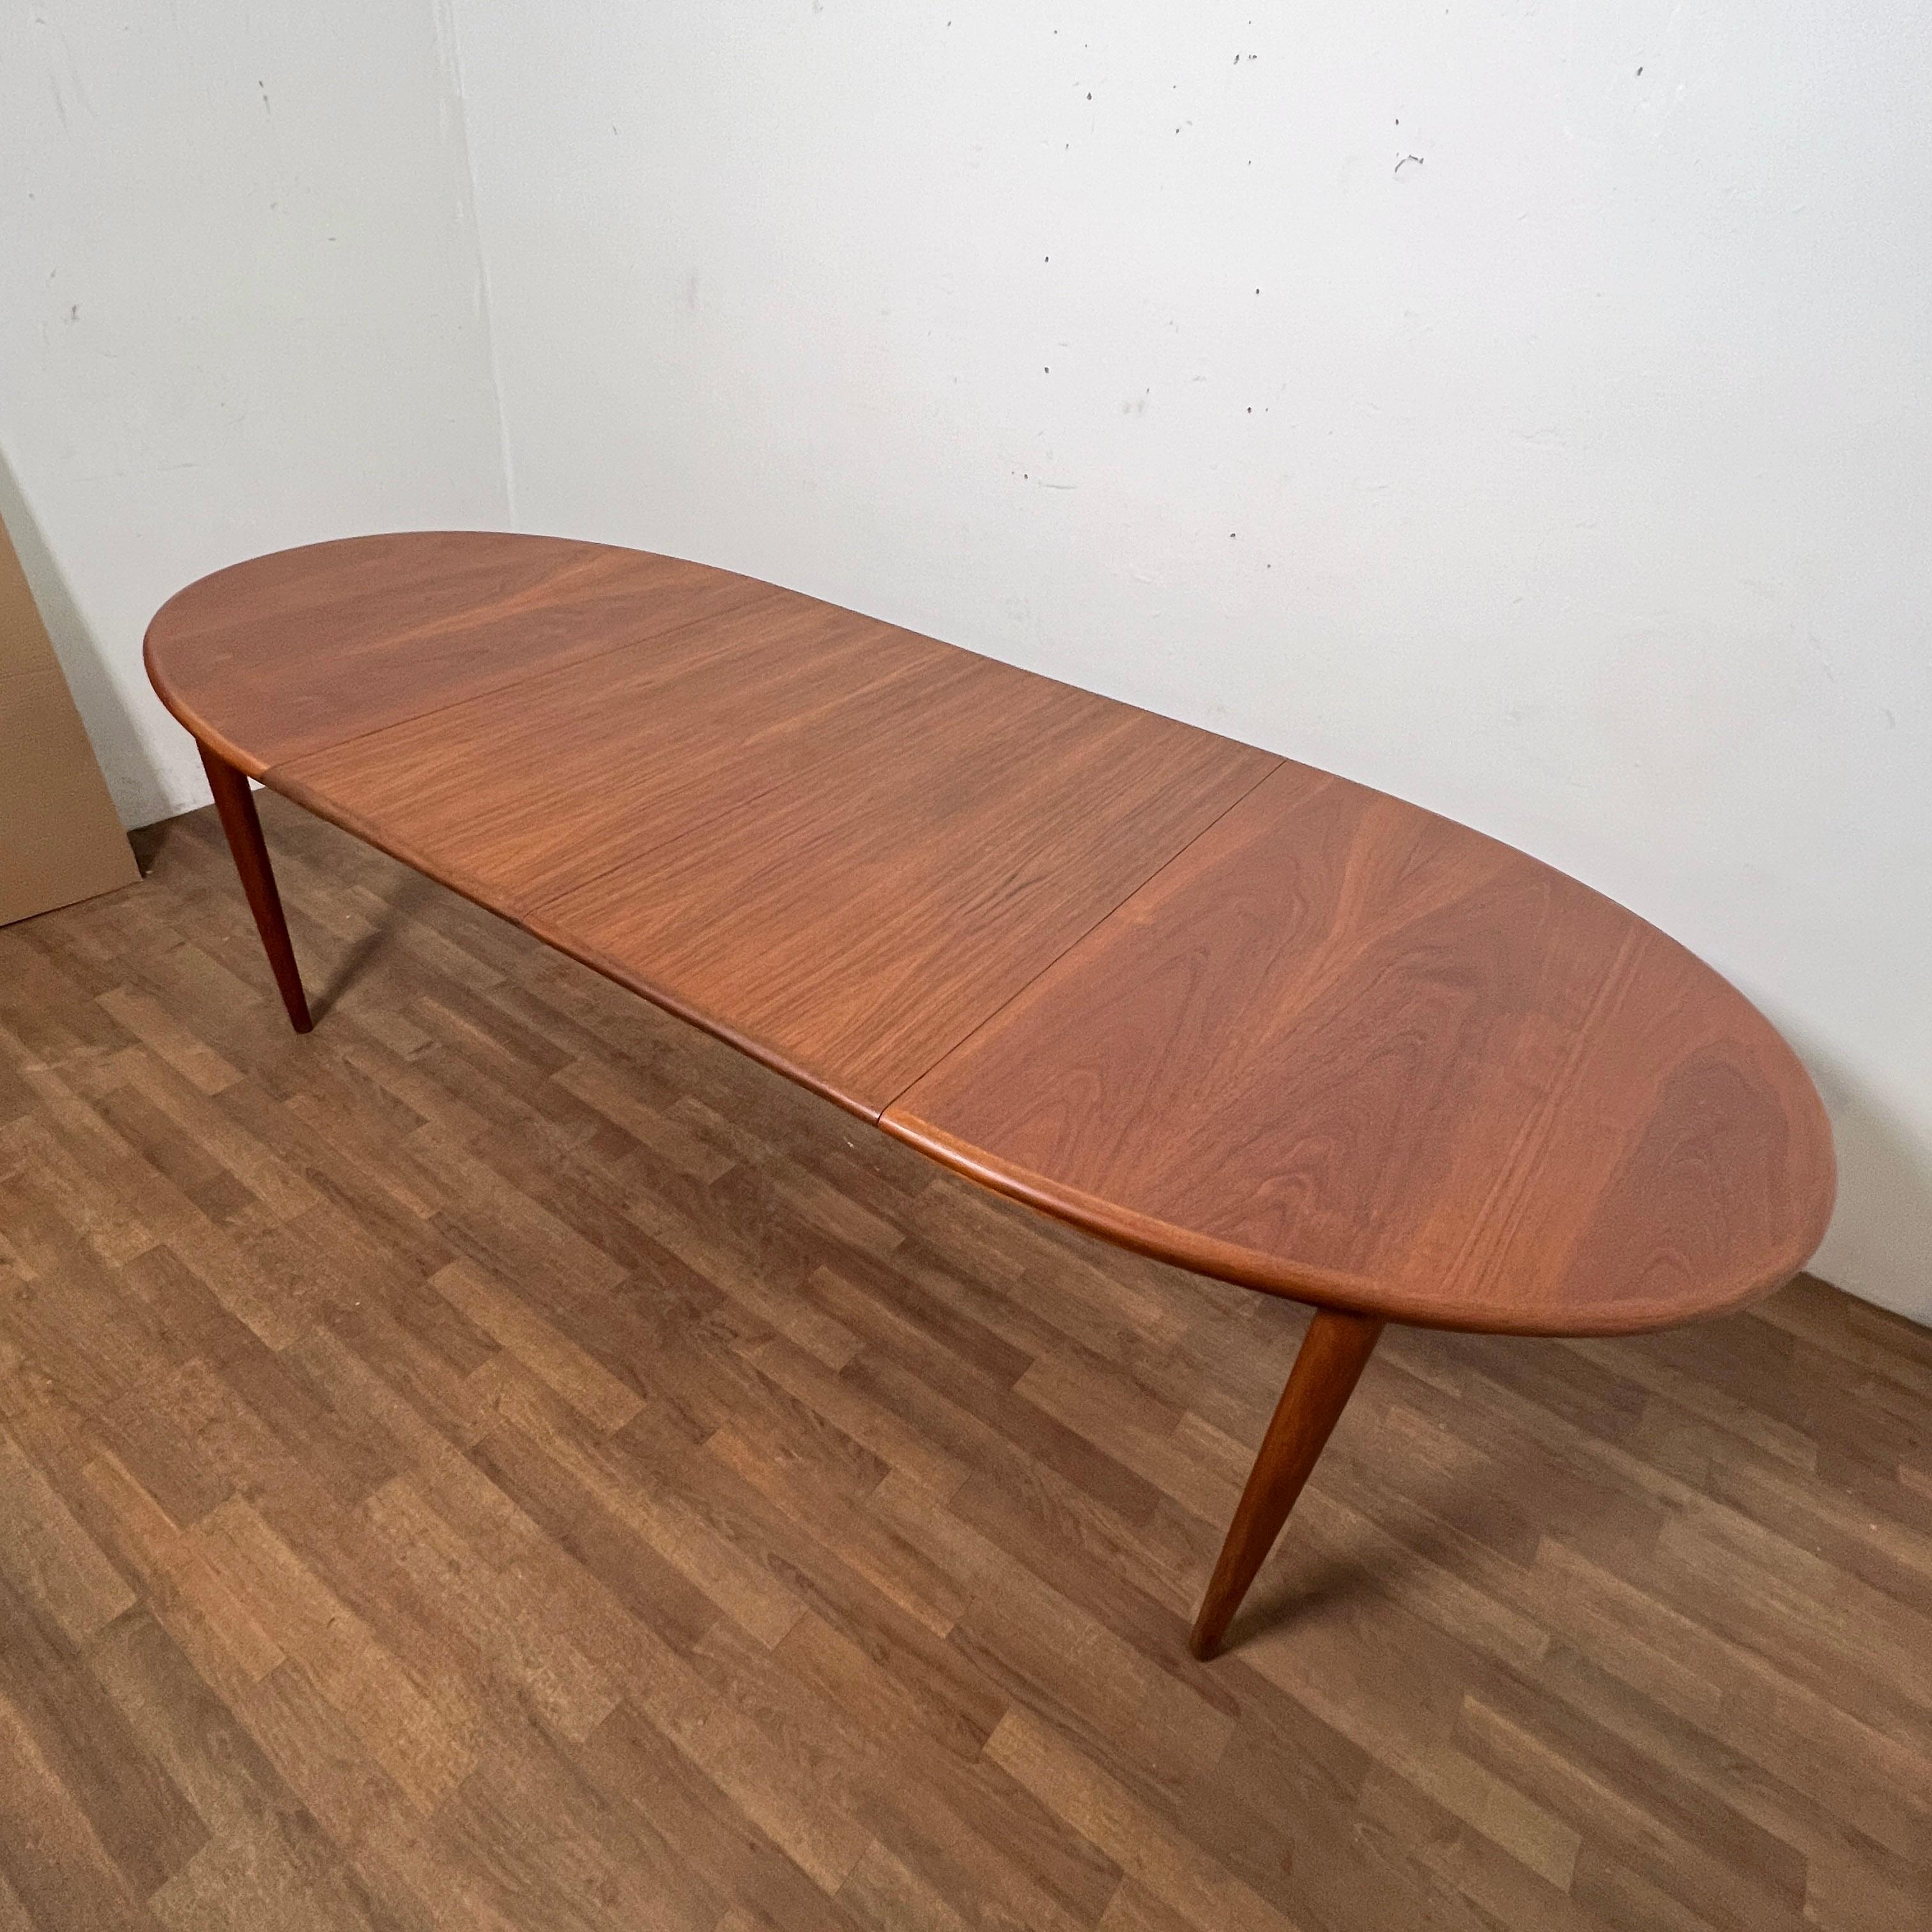 Danish Teak Oval Dining Table With Two Leaves by Gudme, Circa 1960s In Good Condition For Sale In Peabody, MA